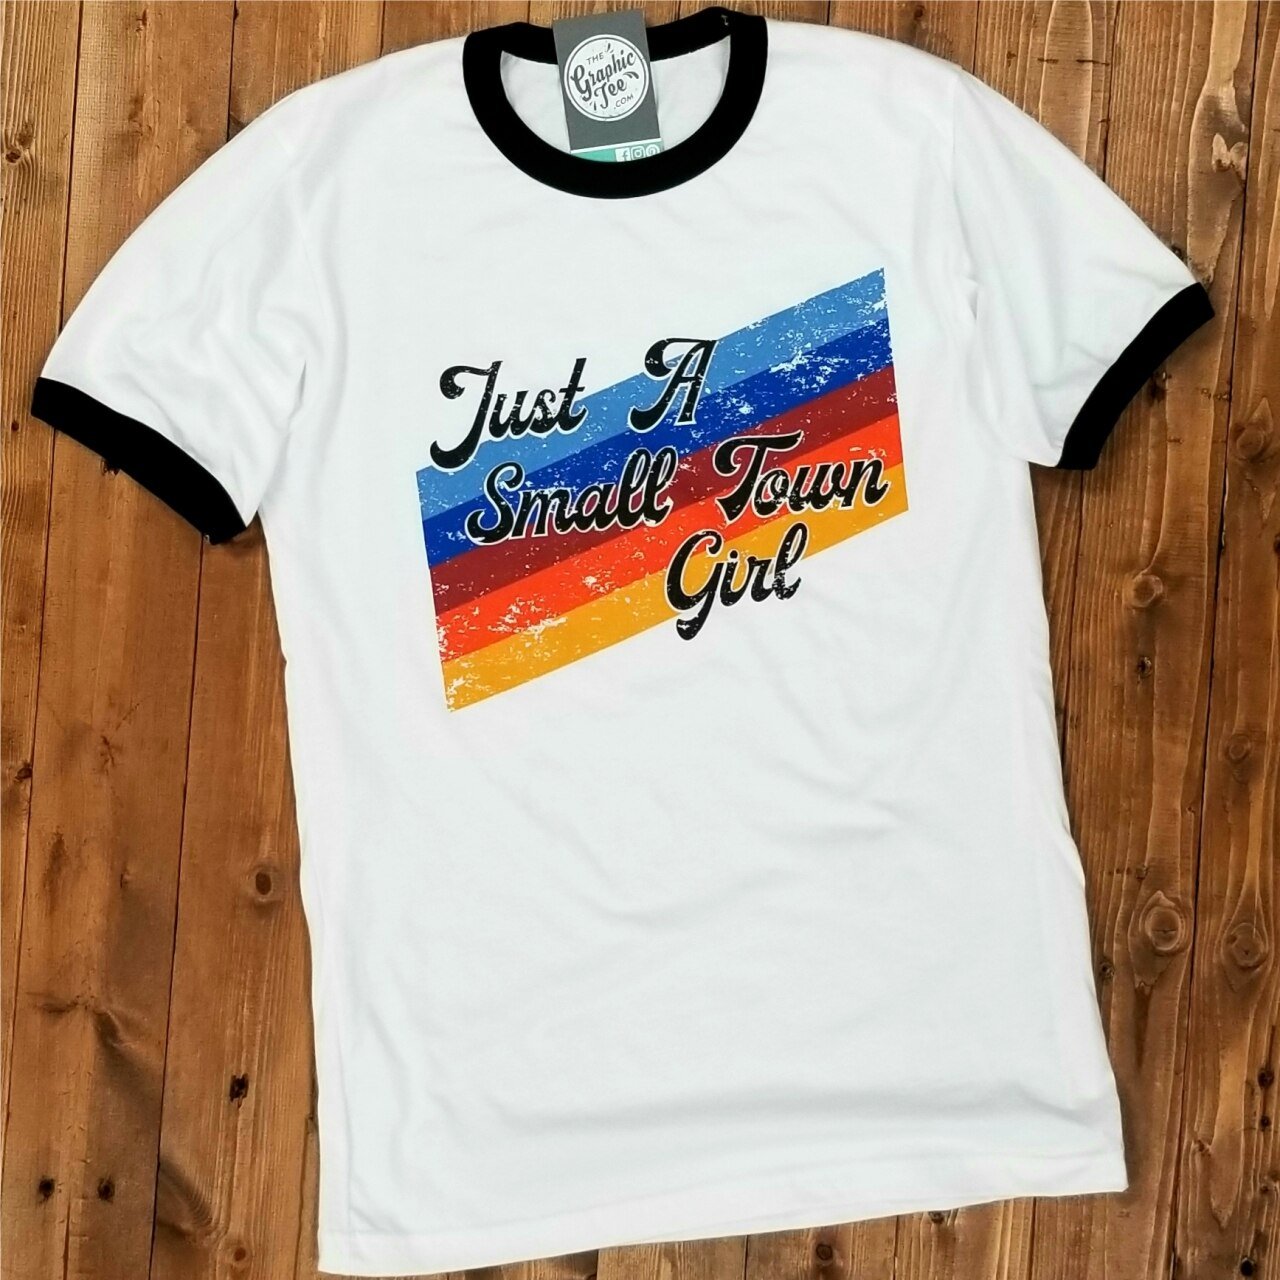 Just A Small Town Girl - Ringer Tee - The Graphic Tee